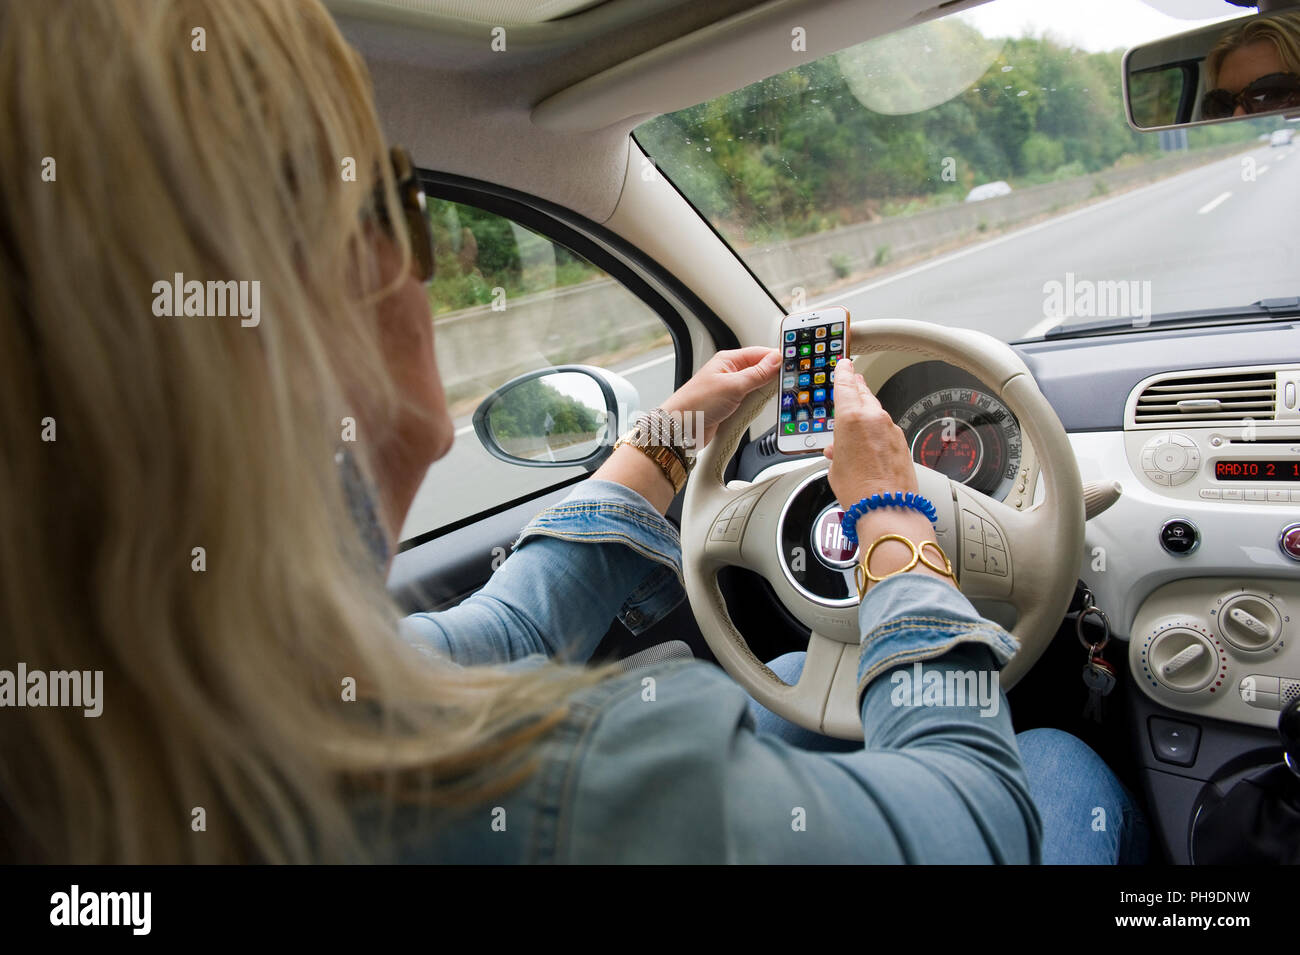 BOTTROP, GERMANY - AUG 16, 2018: A blond woman is checking her smartphone  while she is driving on a highway in full speed Stock Photo - Alamy